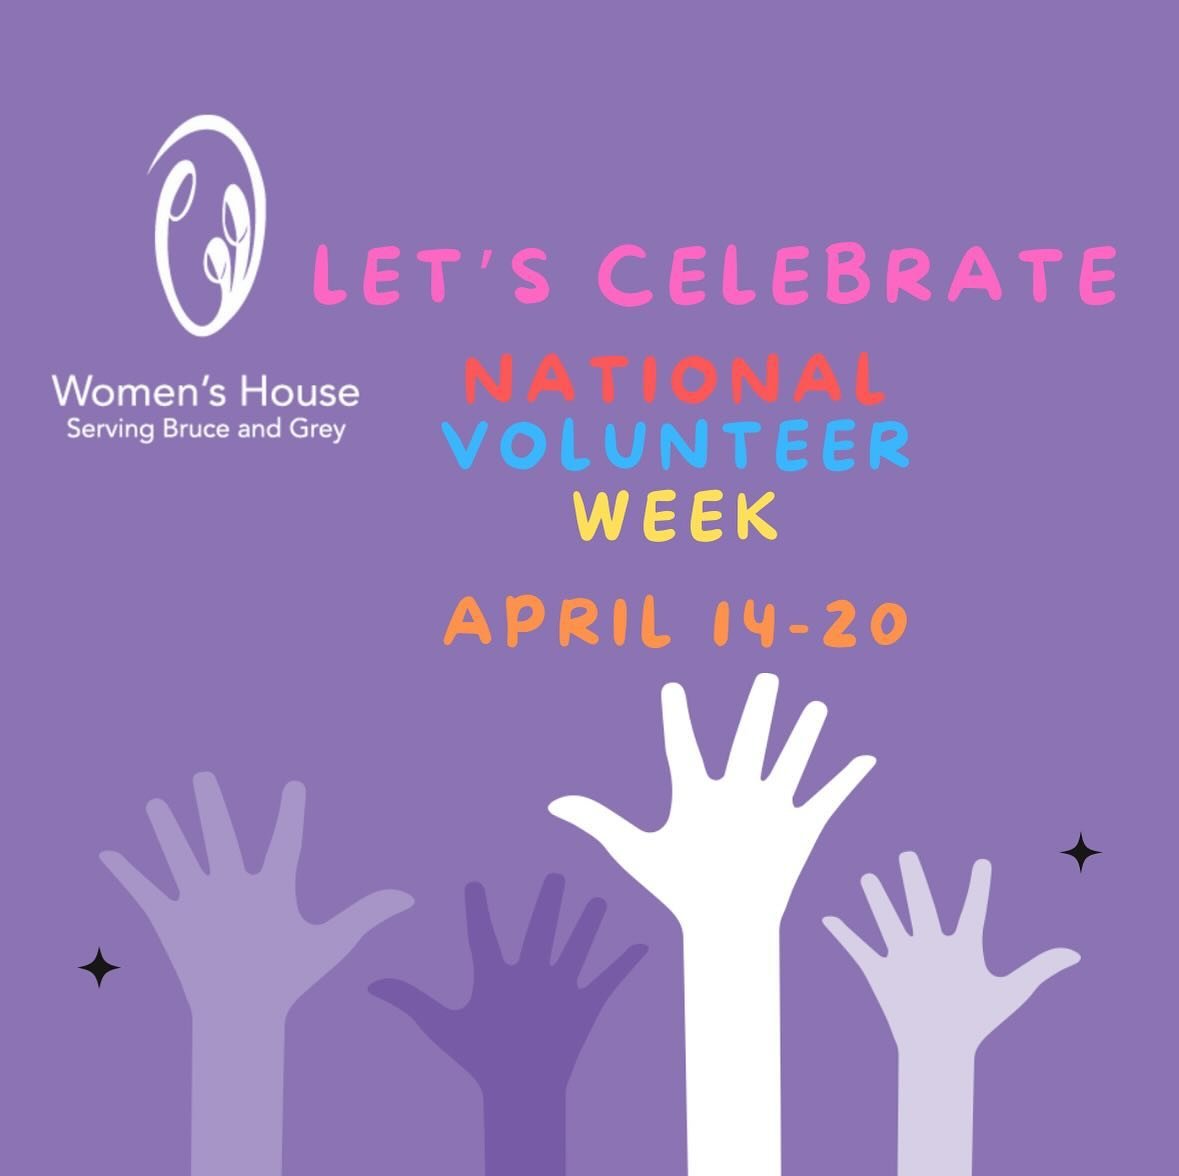 Women&rsquo;s House Serving Bruce &amp; Grey couldn&rsquo;t be what it is today without to hard work and support our volunteers do for our organization. Let&rsquo;s appreciate and thank them this week💪🏼🤗❤️ 
#whsbg #nationalvolunteerweek #kincardin